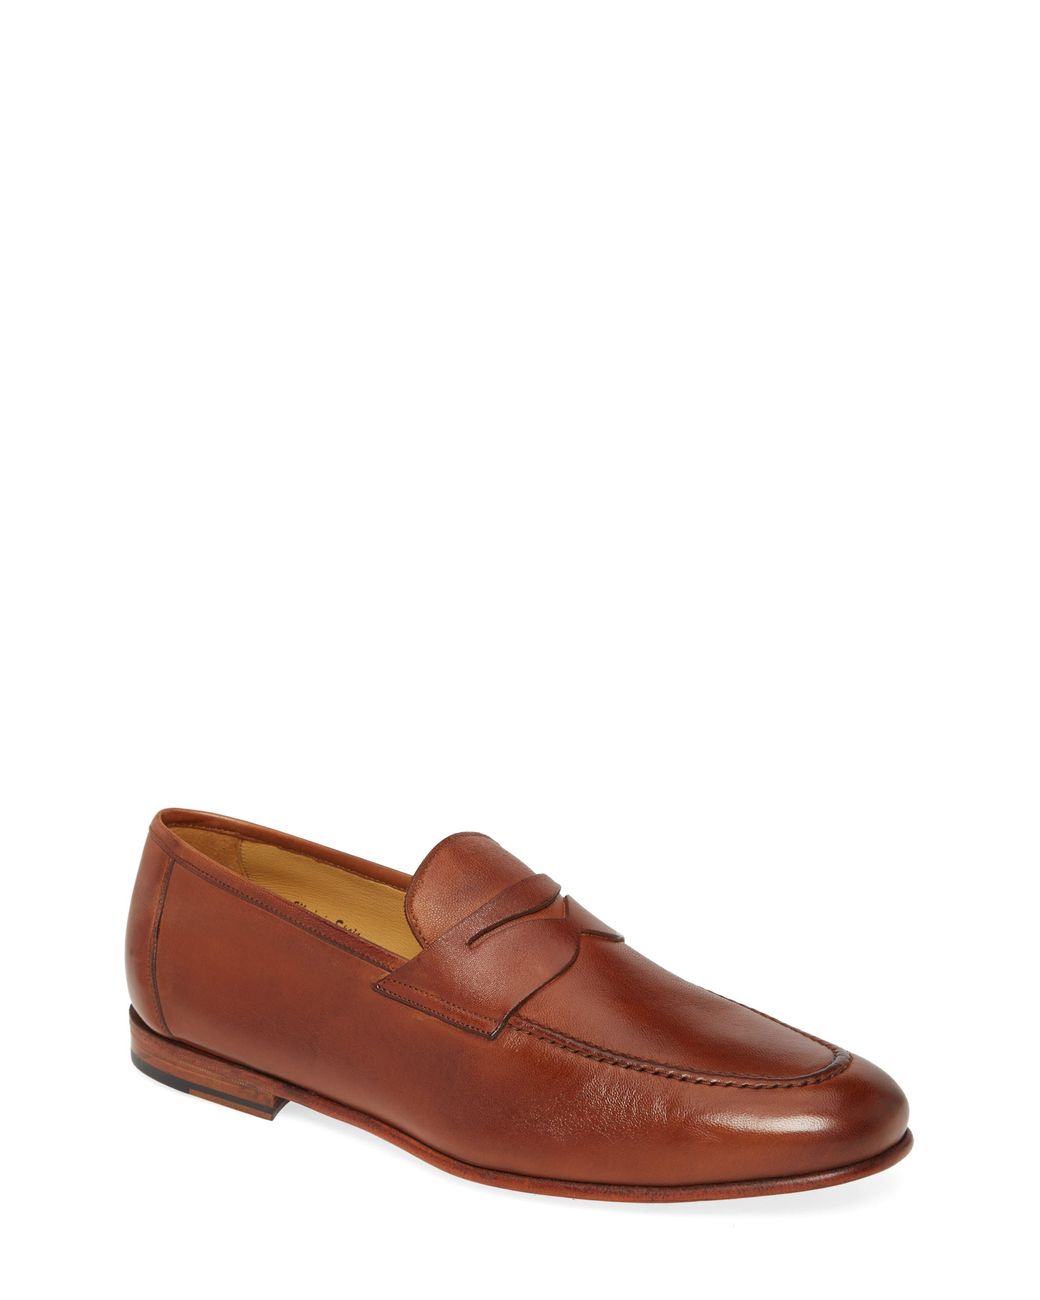 Mezlan Leather Pompei Penny Loafer in Tan (Brown) for Men - Lyst